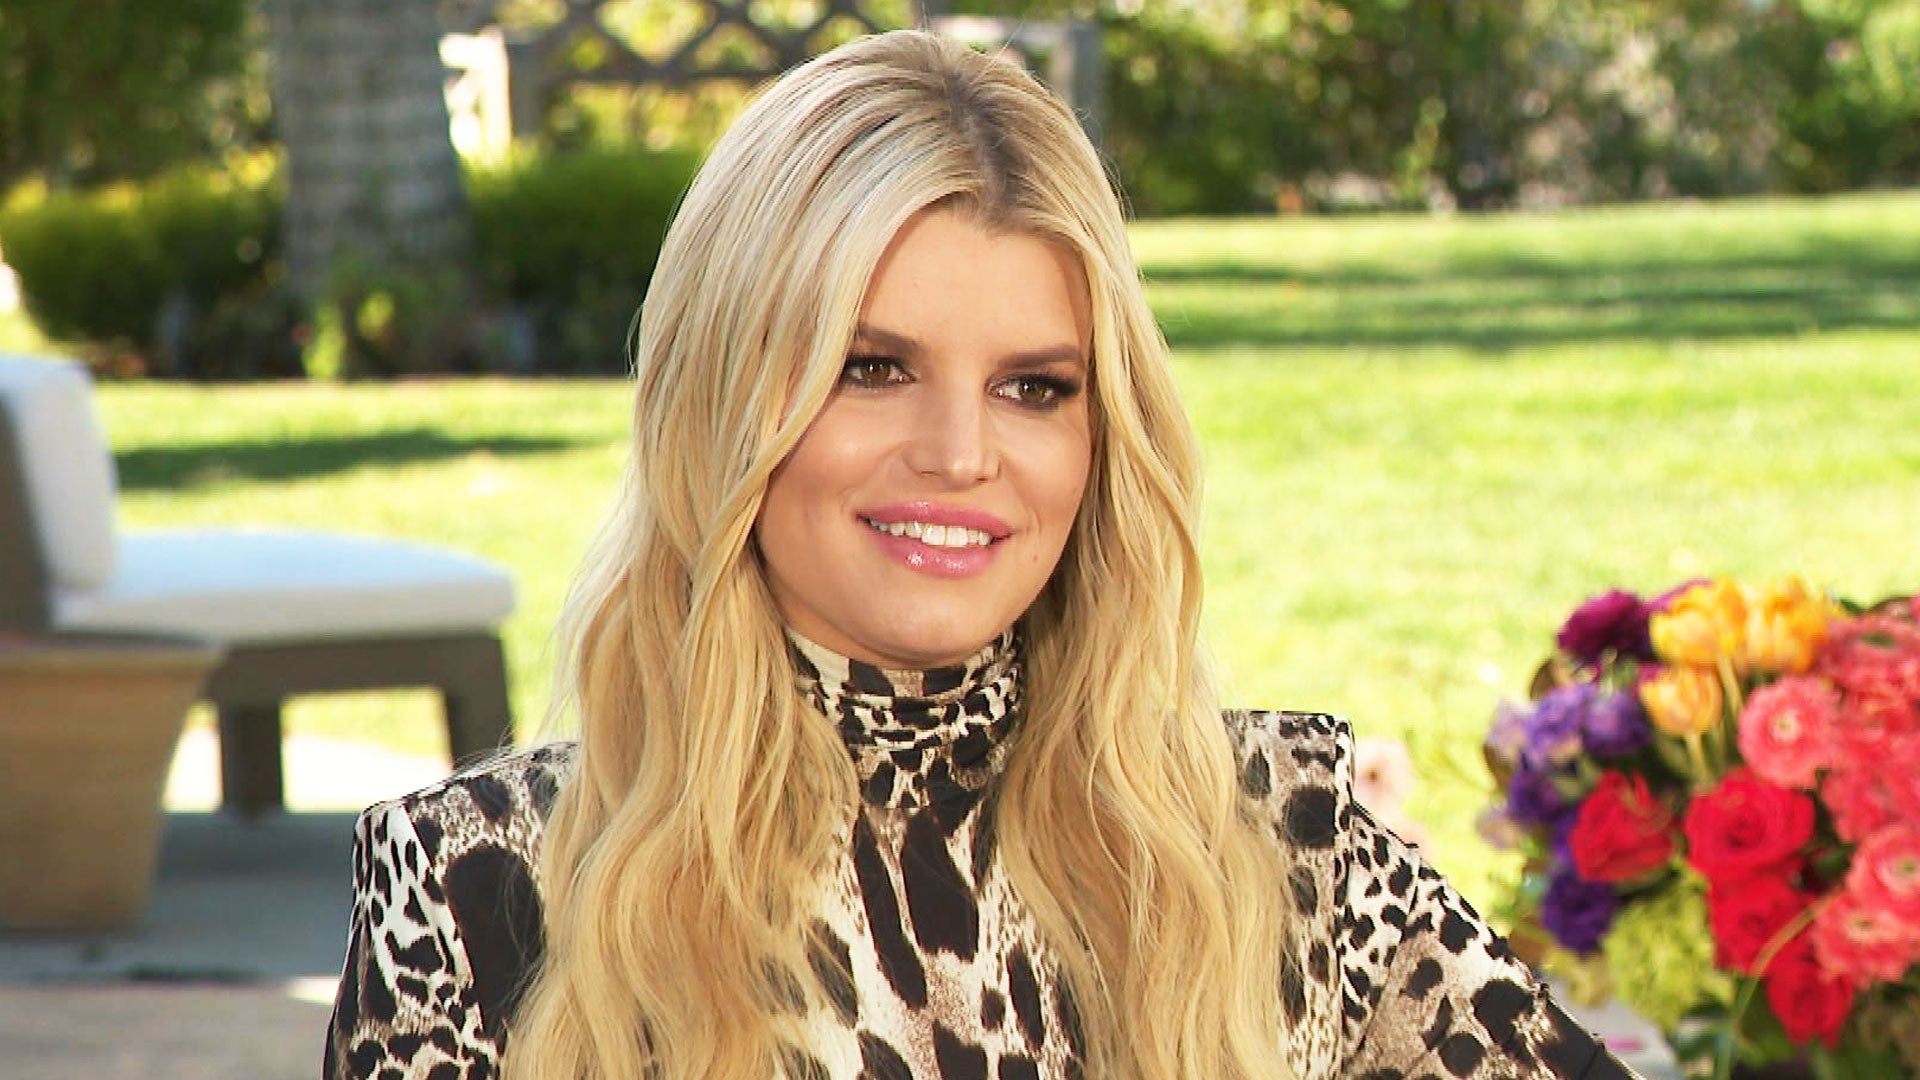 Jessica Simpson steps out in another painful outfit